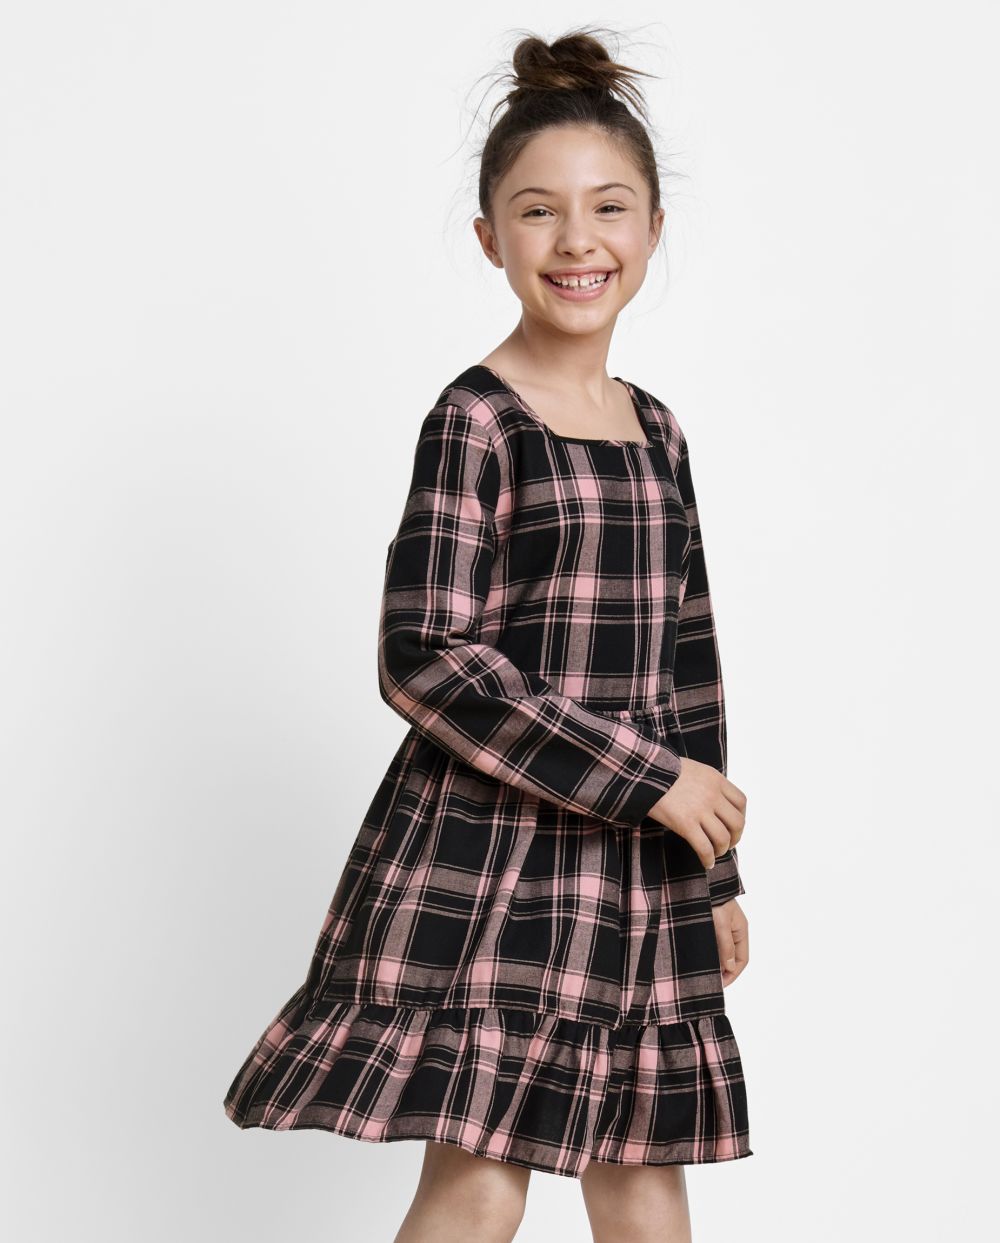 Girls Long Sleeves Square Neck Above the Knee Plaid Print Tiered Dress